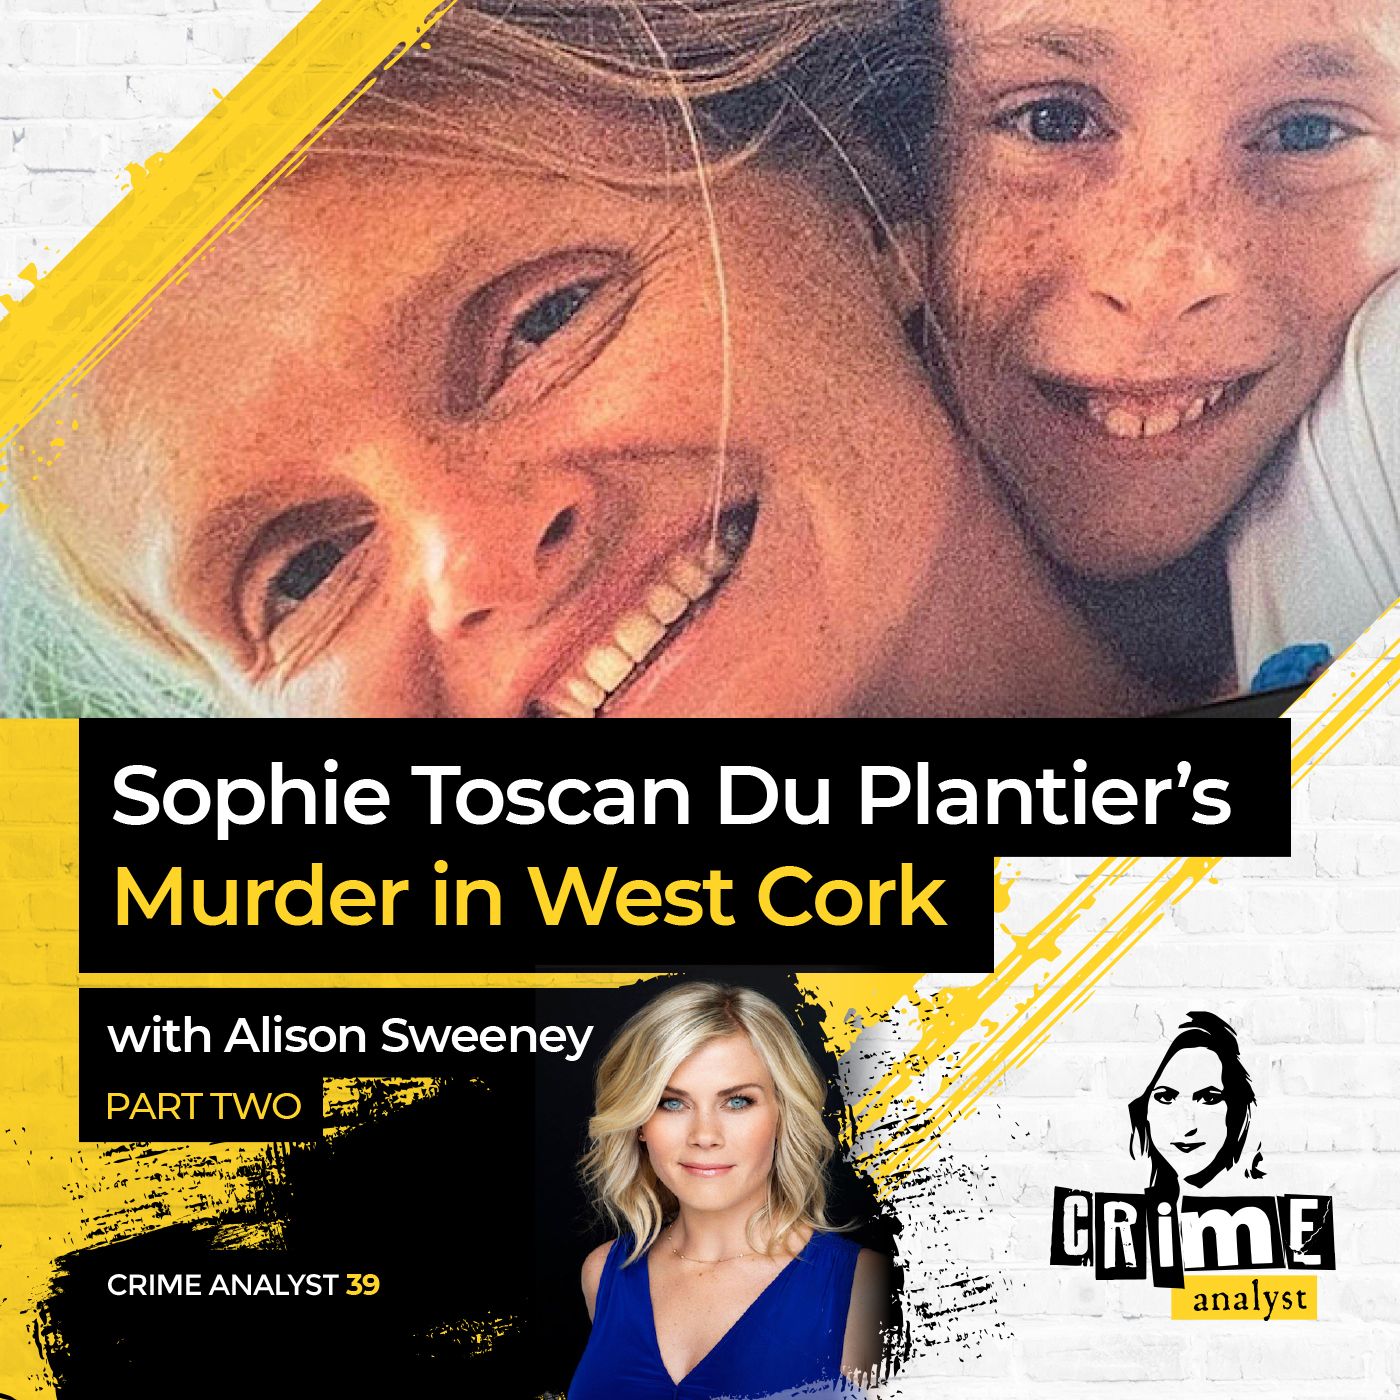 39: The Crime Analyst | Ep 39 | Sophie Toscan Du Plantier’s Murder with Alison Sweeney, Part 2 Image